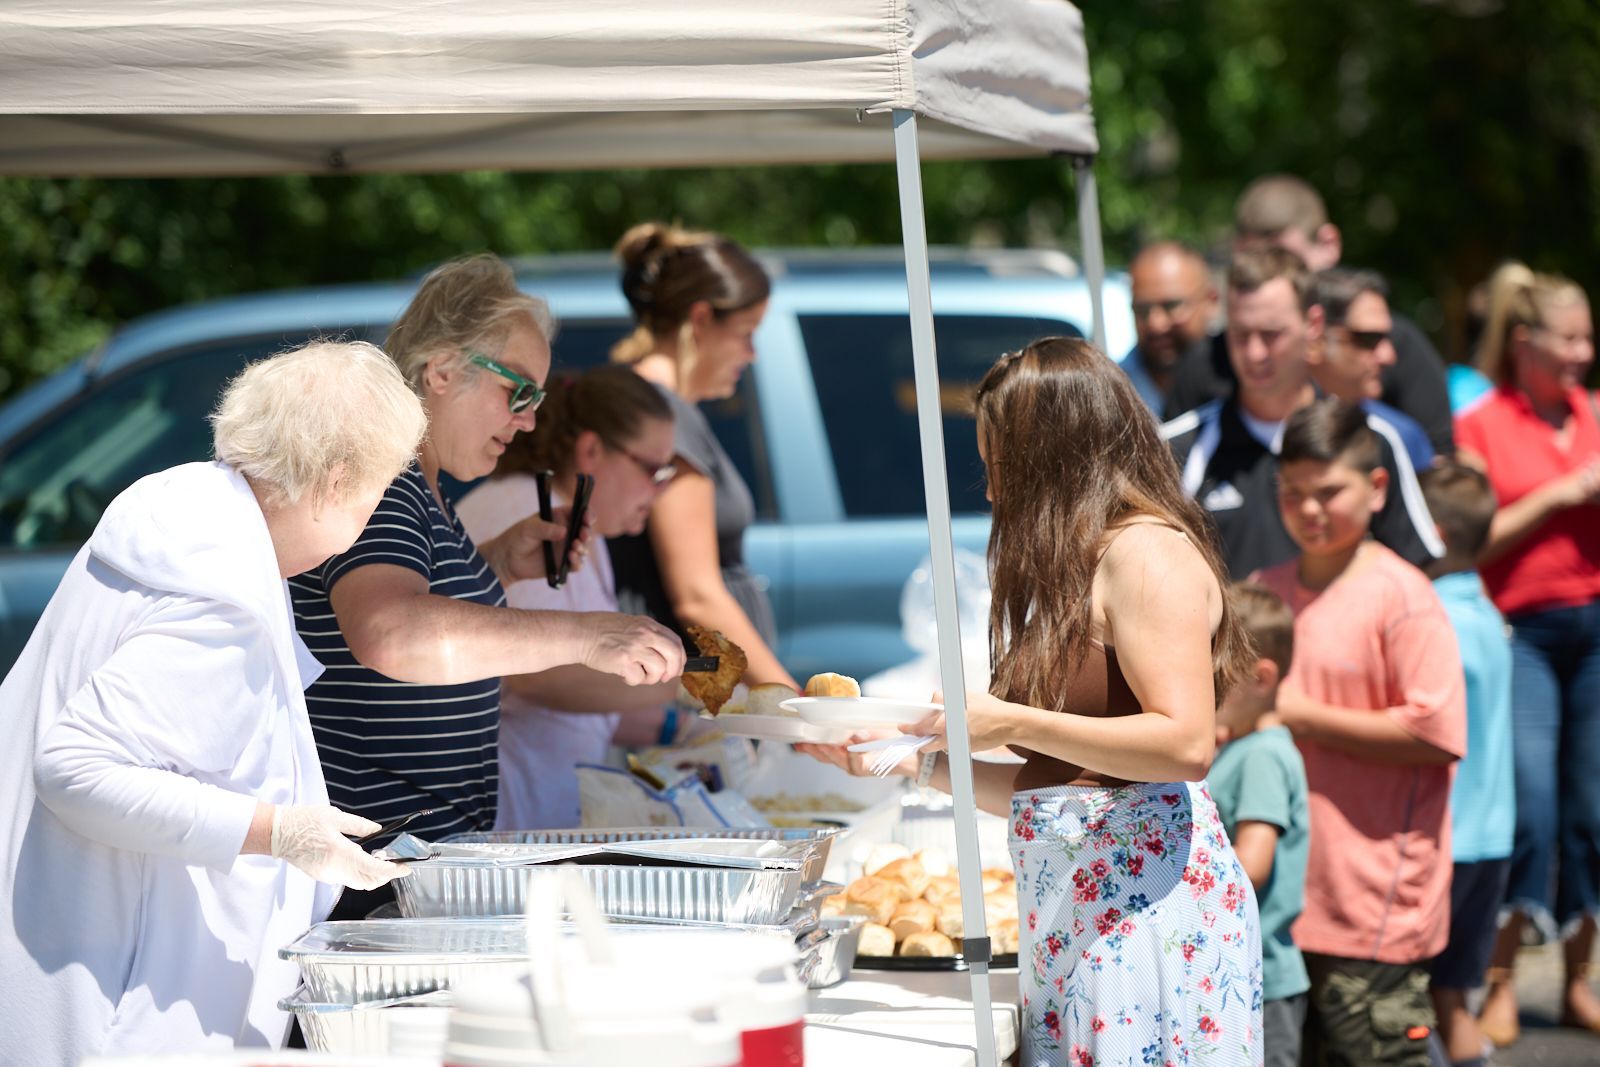 women serving food to parishioners, chicken after church event